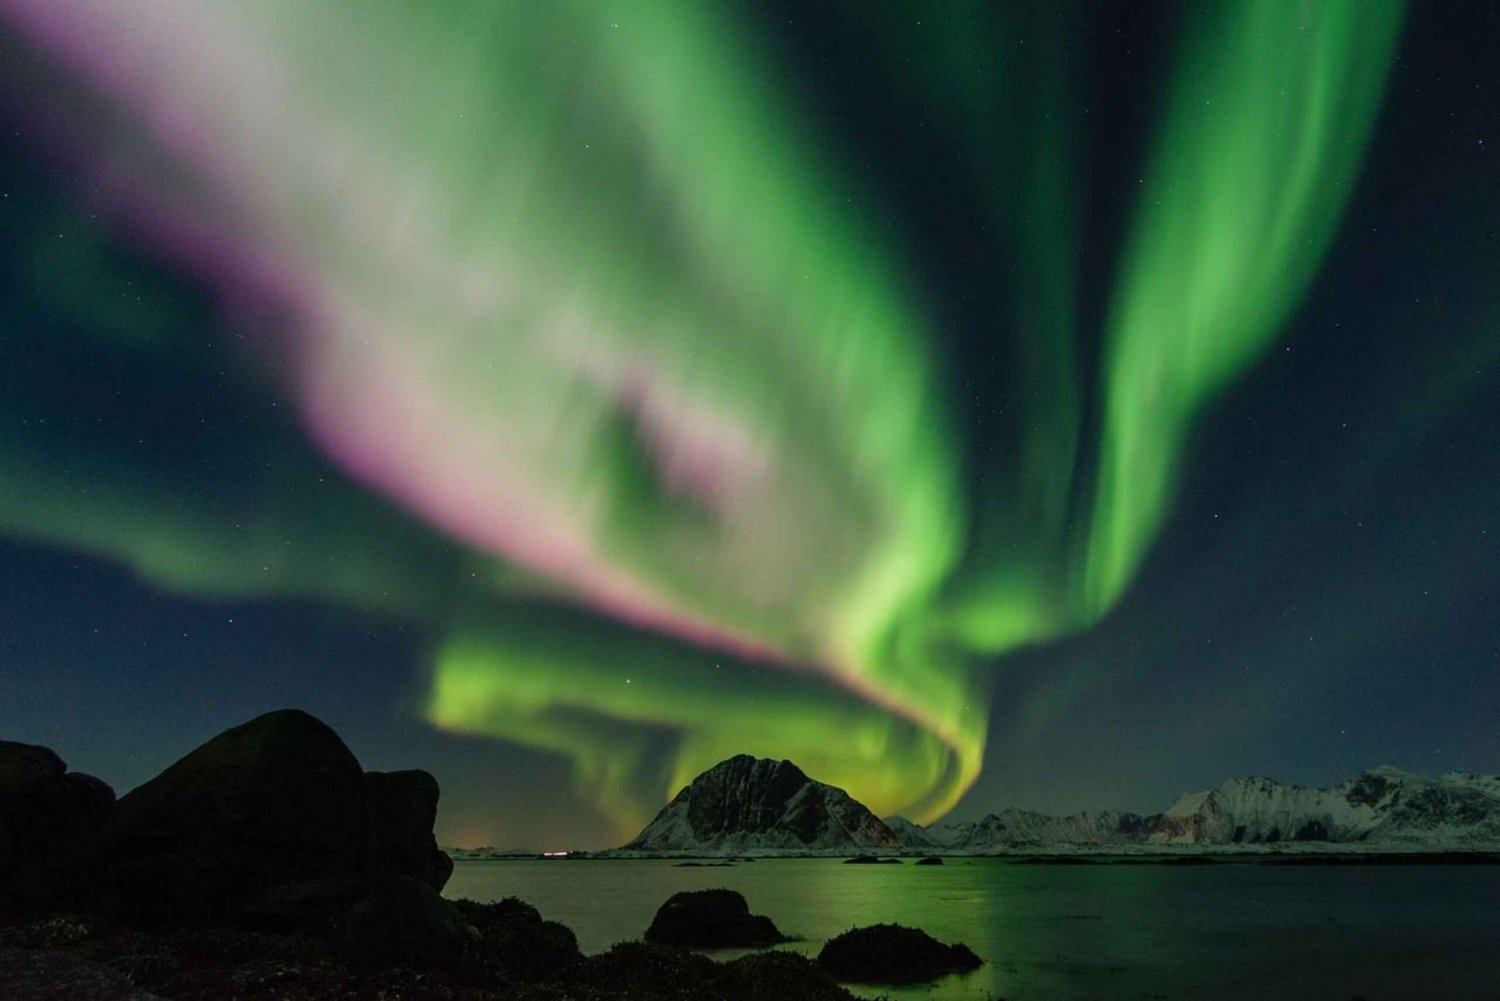 From Reykjavik: Northern Lights Sightseeing Cruise